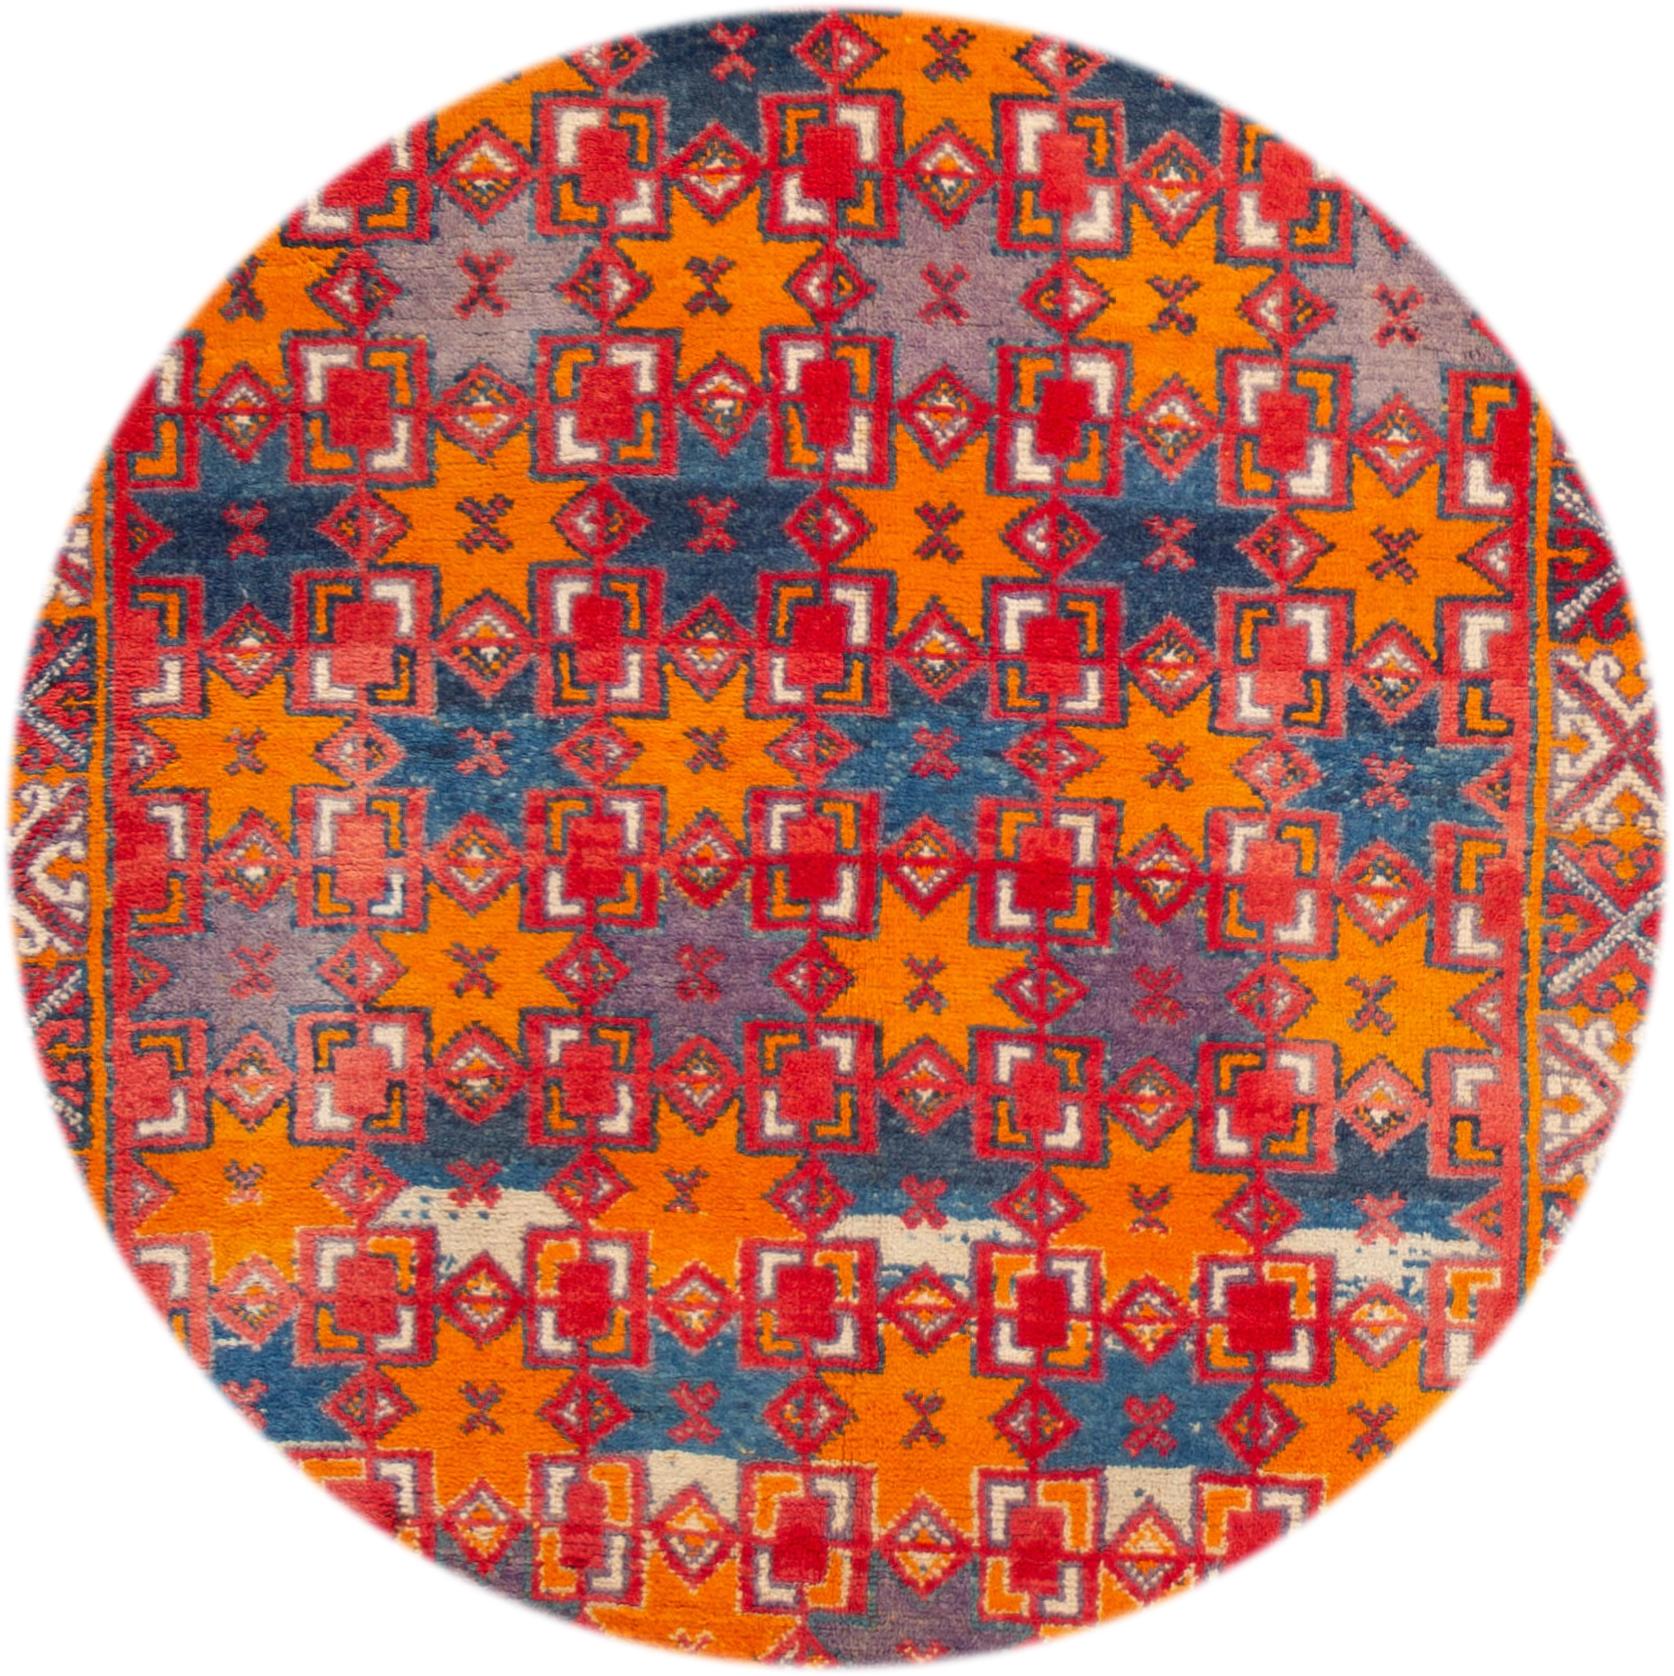 Beautiful vintage Moroccan rug, hand knotted wool with a red field, blue and orange accents in an all-over geometric design,
circa 1940.
This rug measures 4' 10